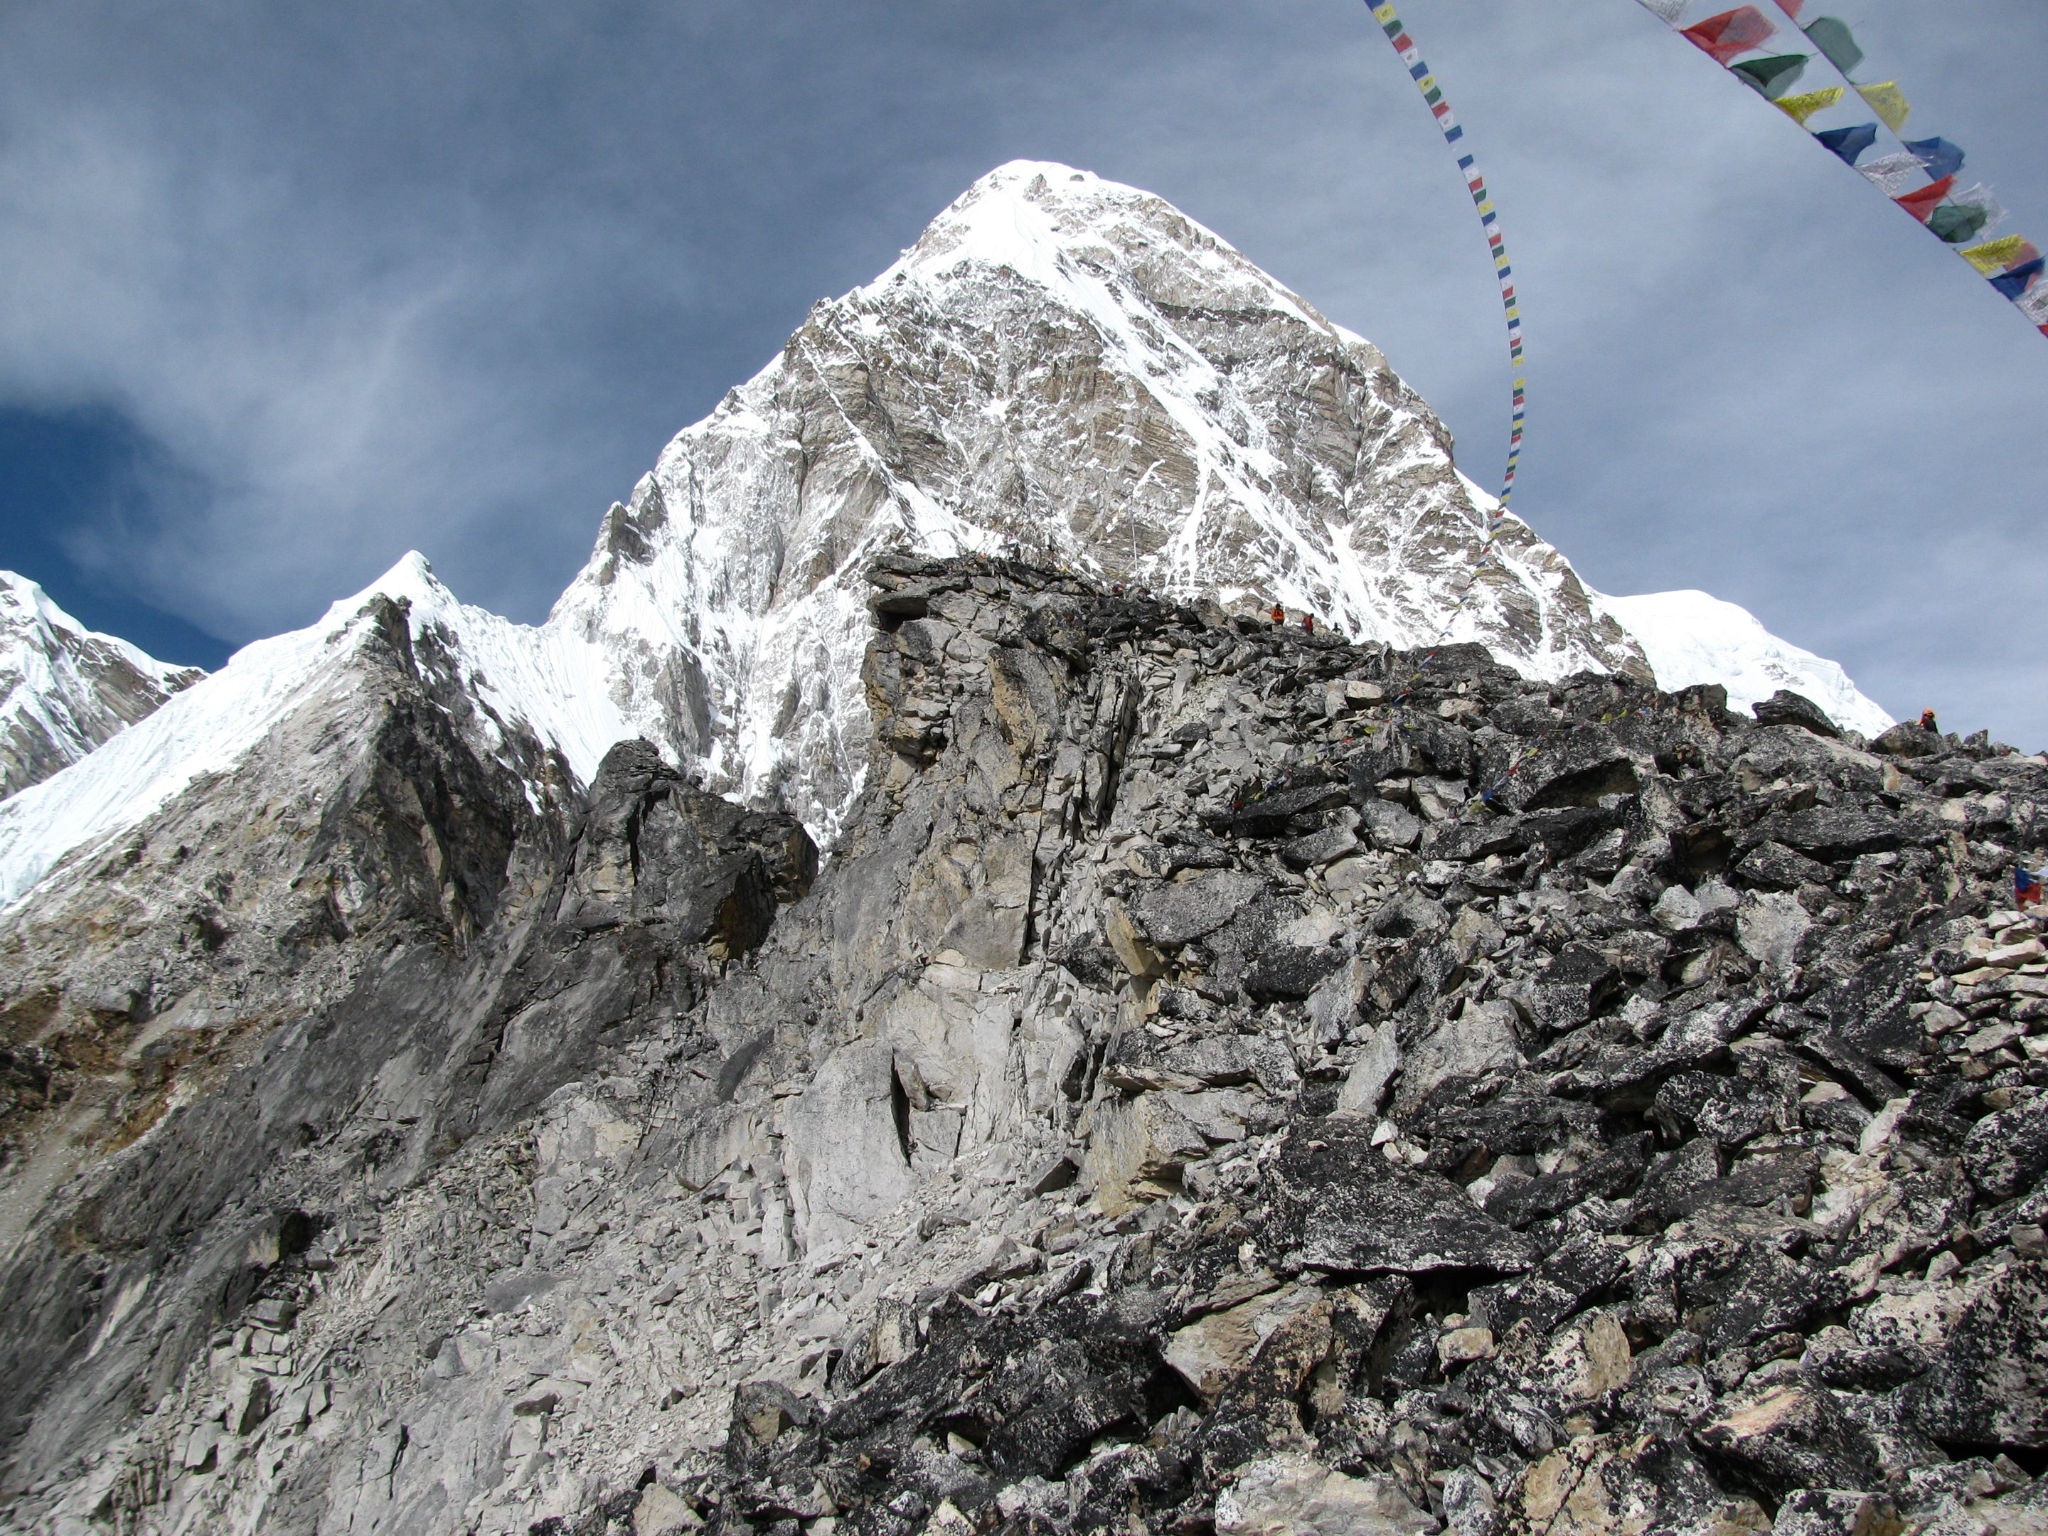 Closest view of Mt. Everest from Kala Patthar
